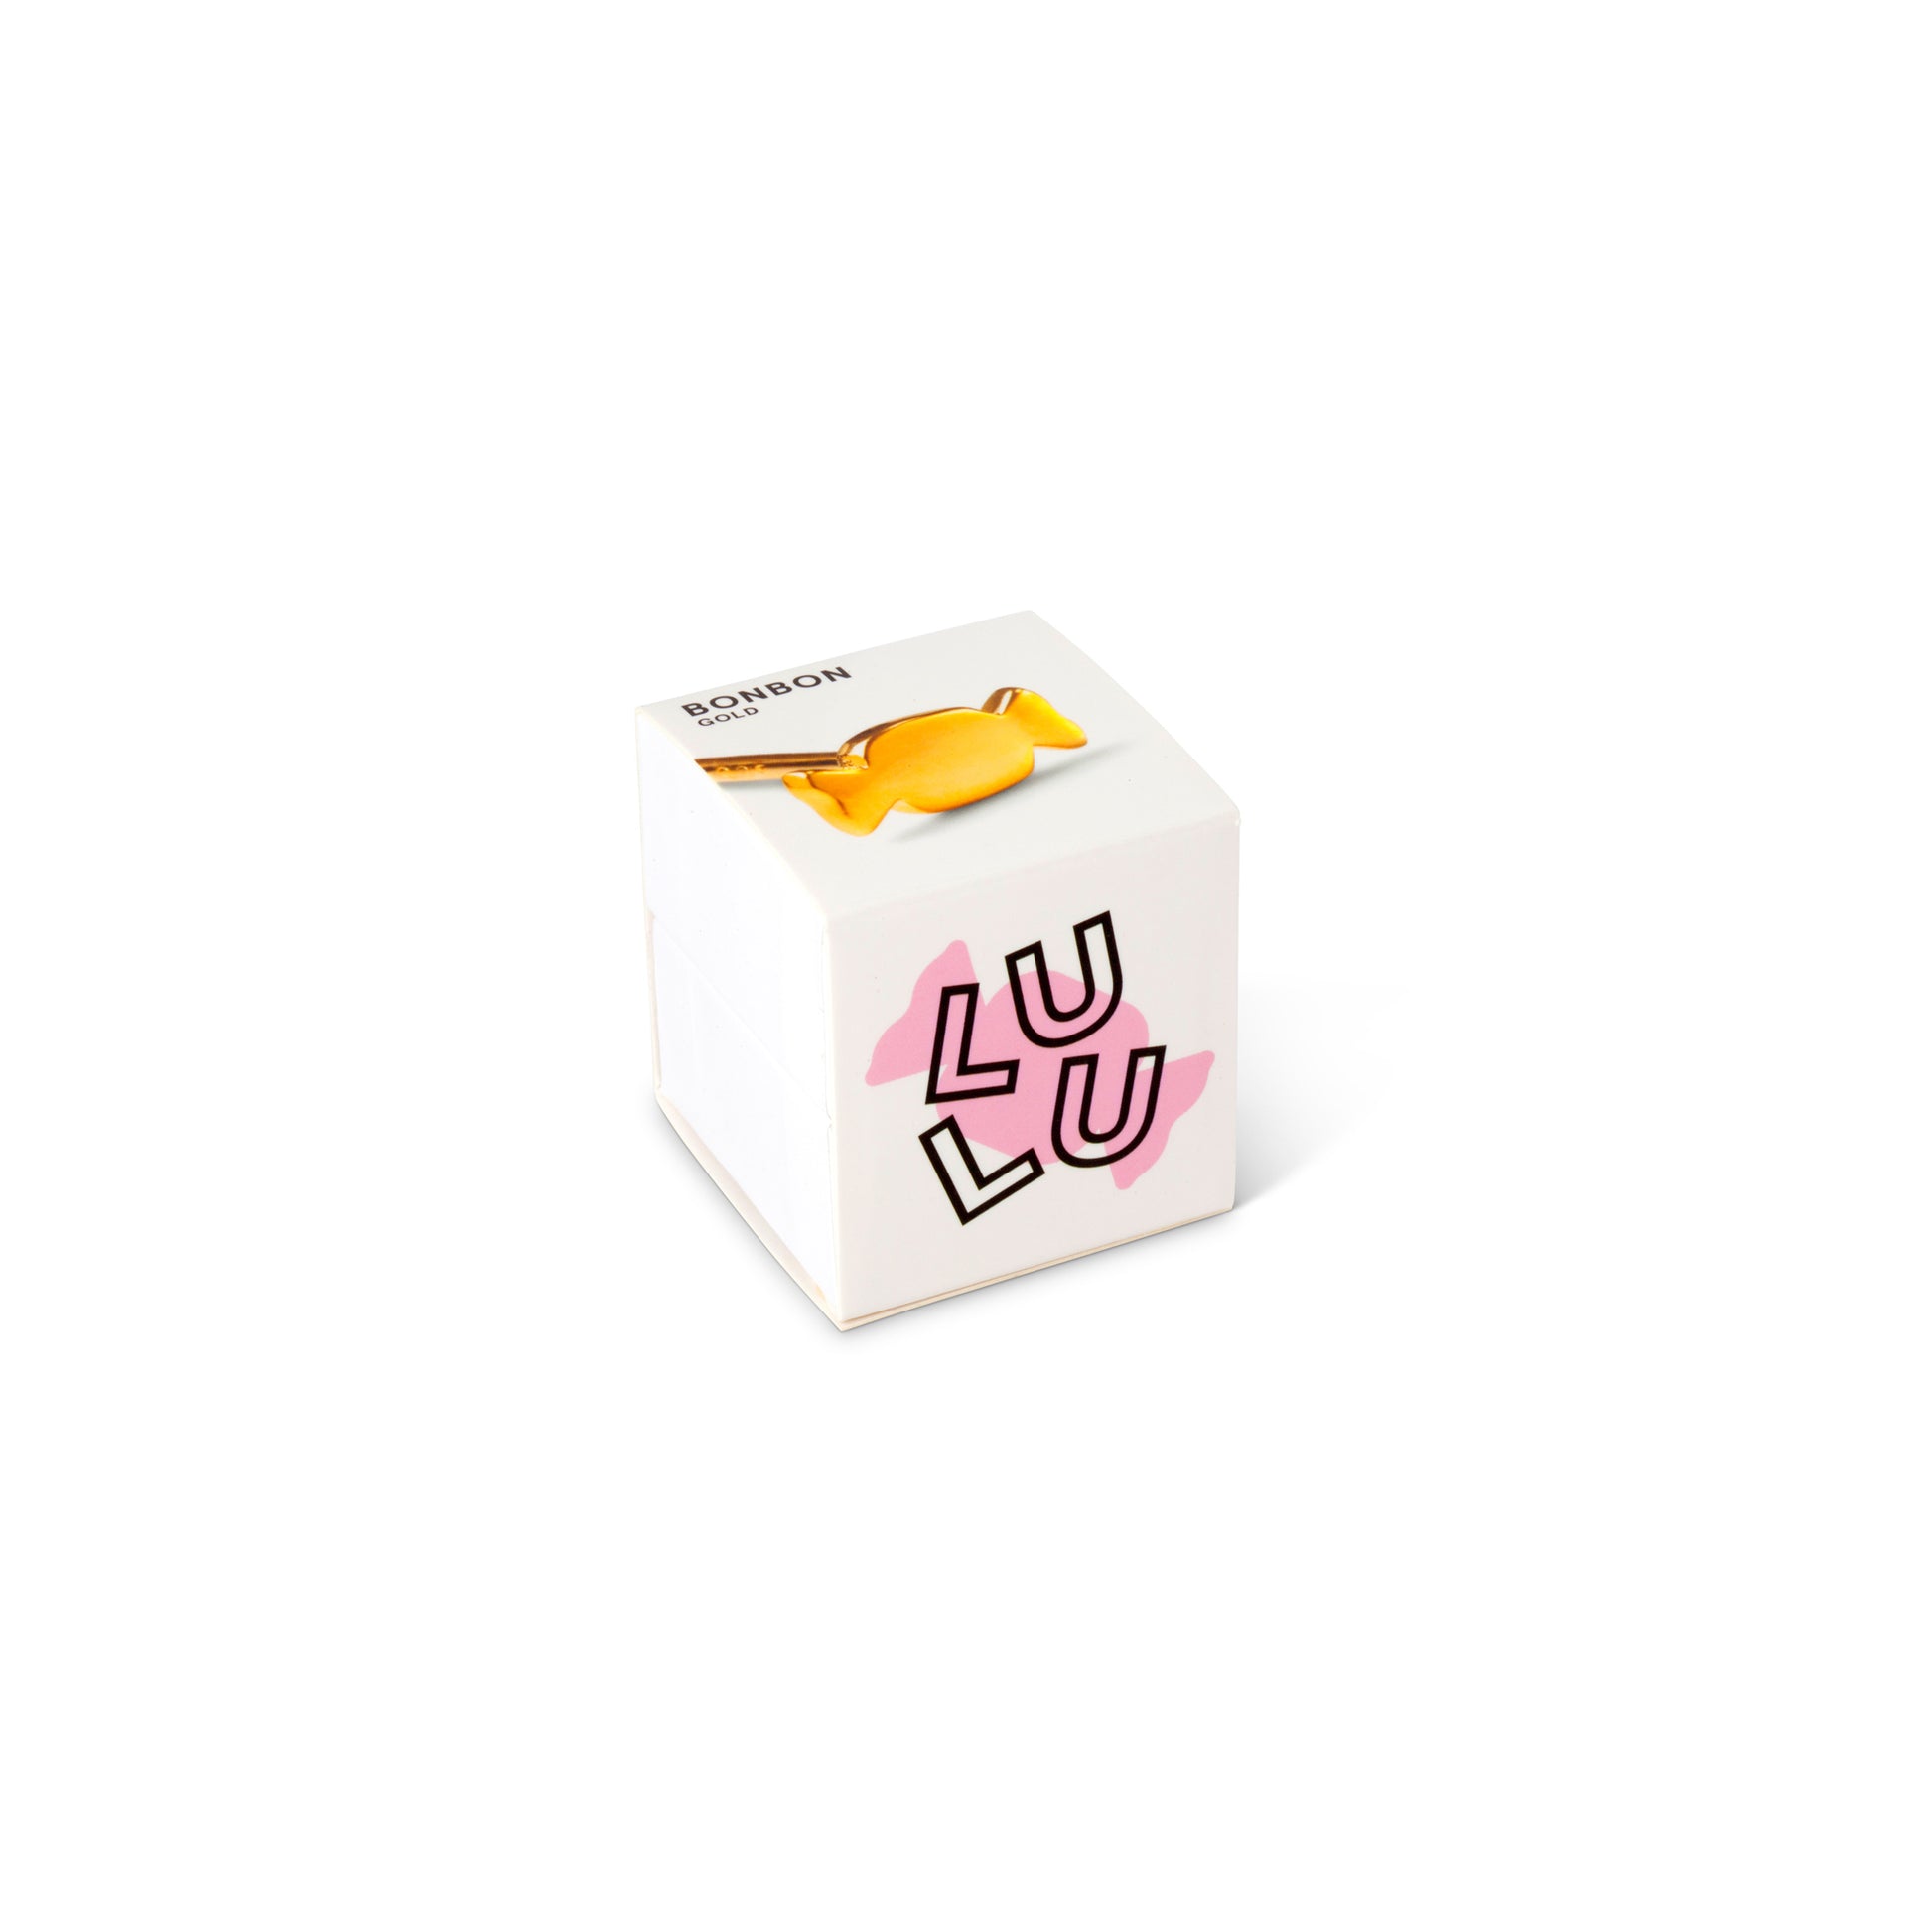 A white box with the word Lulu Copenhagen on it, containing BonBon Single Stud - Gold plated earrings.